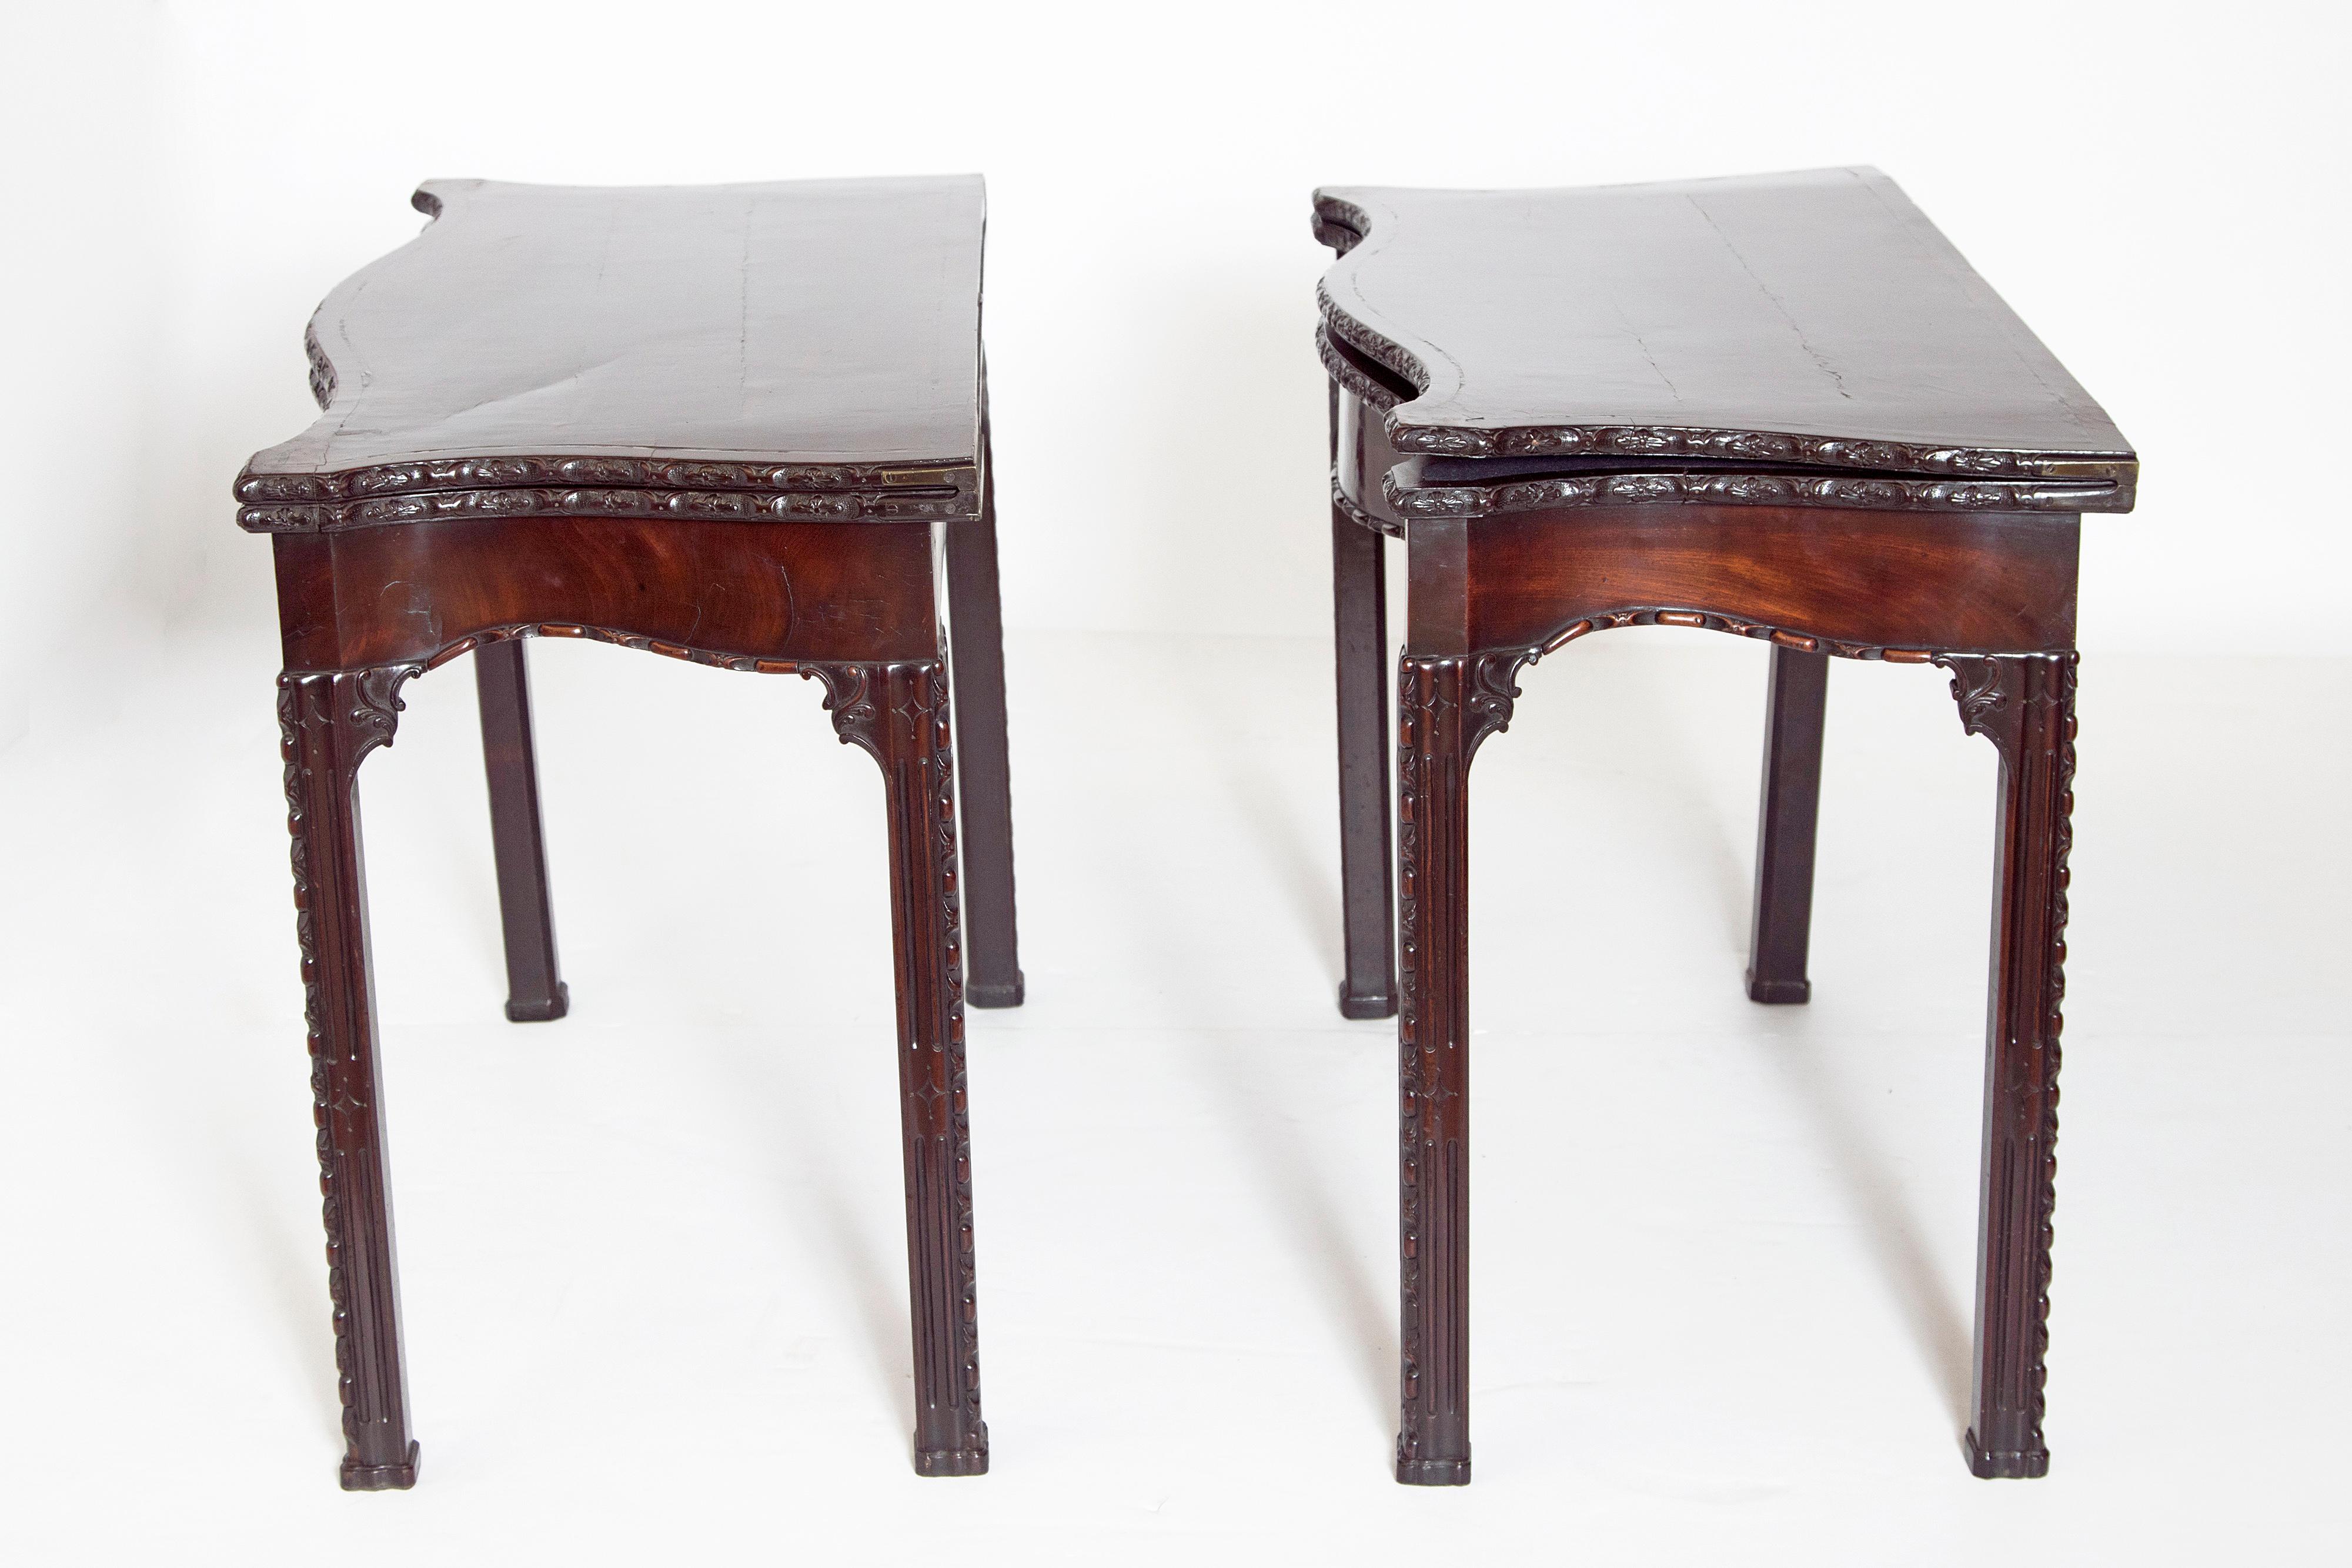 Hand-Carved Pair of 18th Century George III Mahogany Card Tables